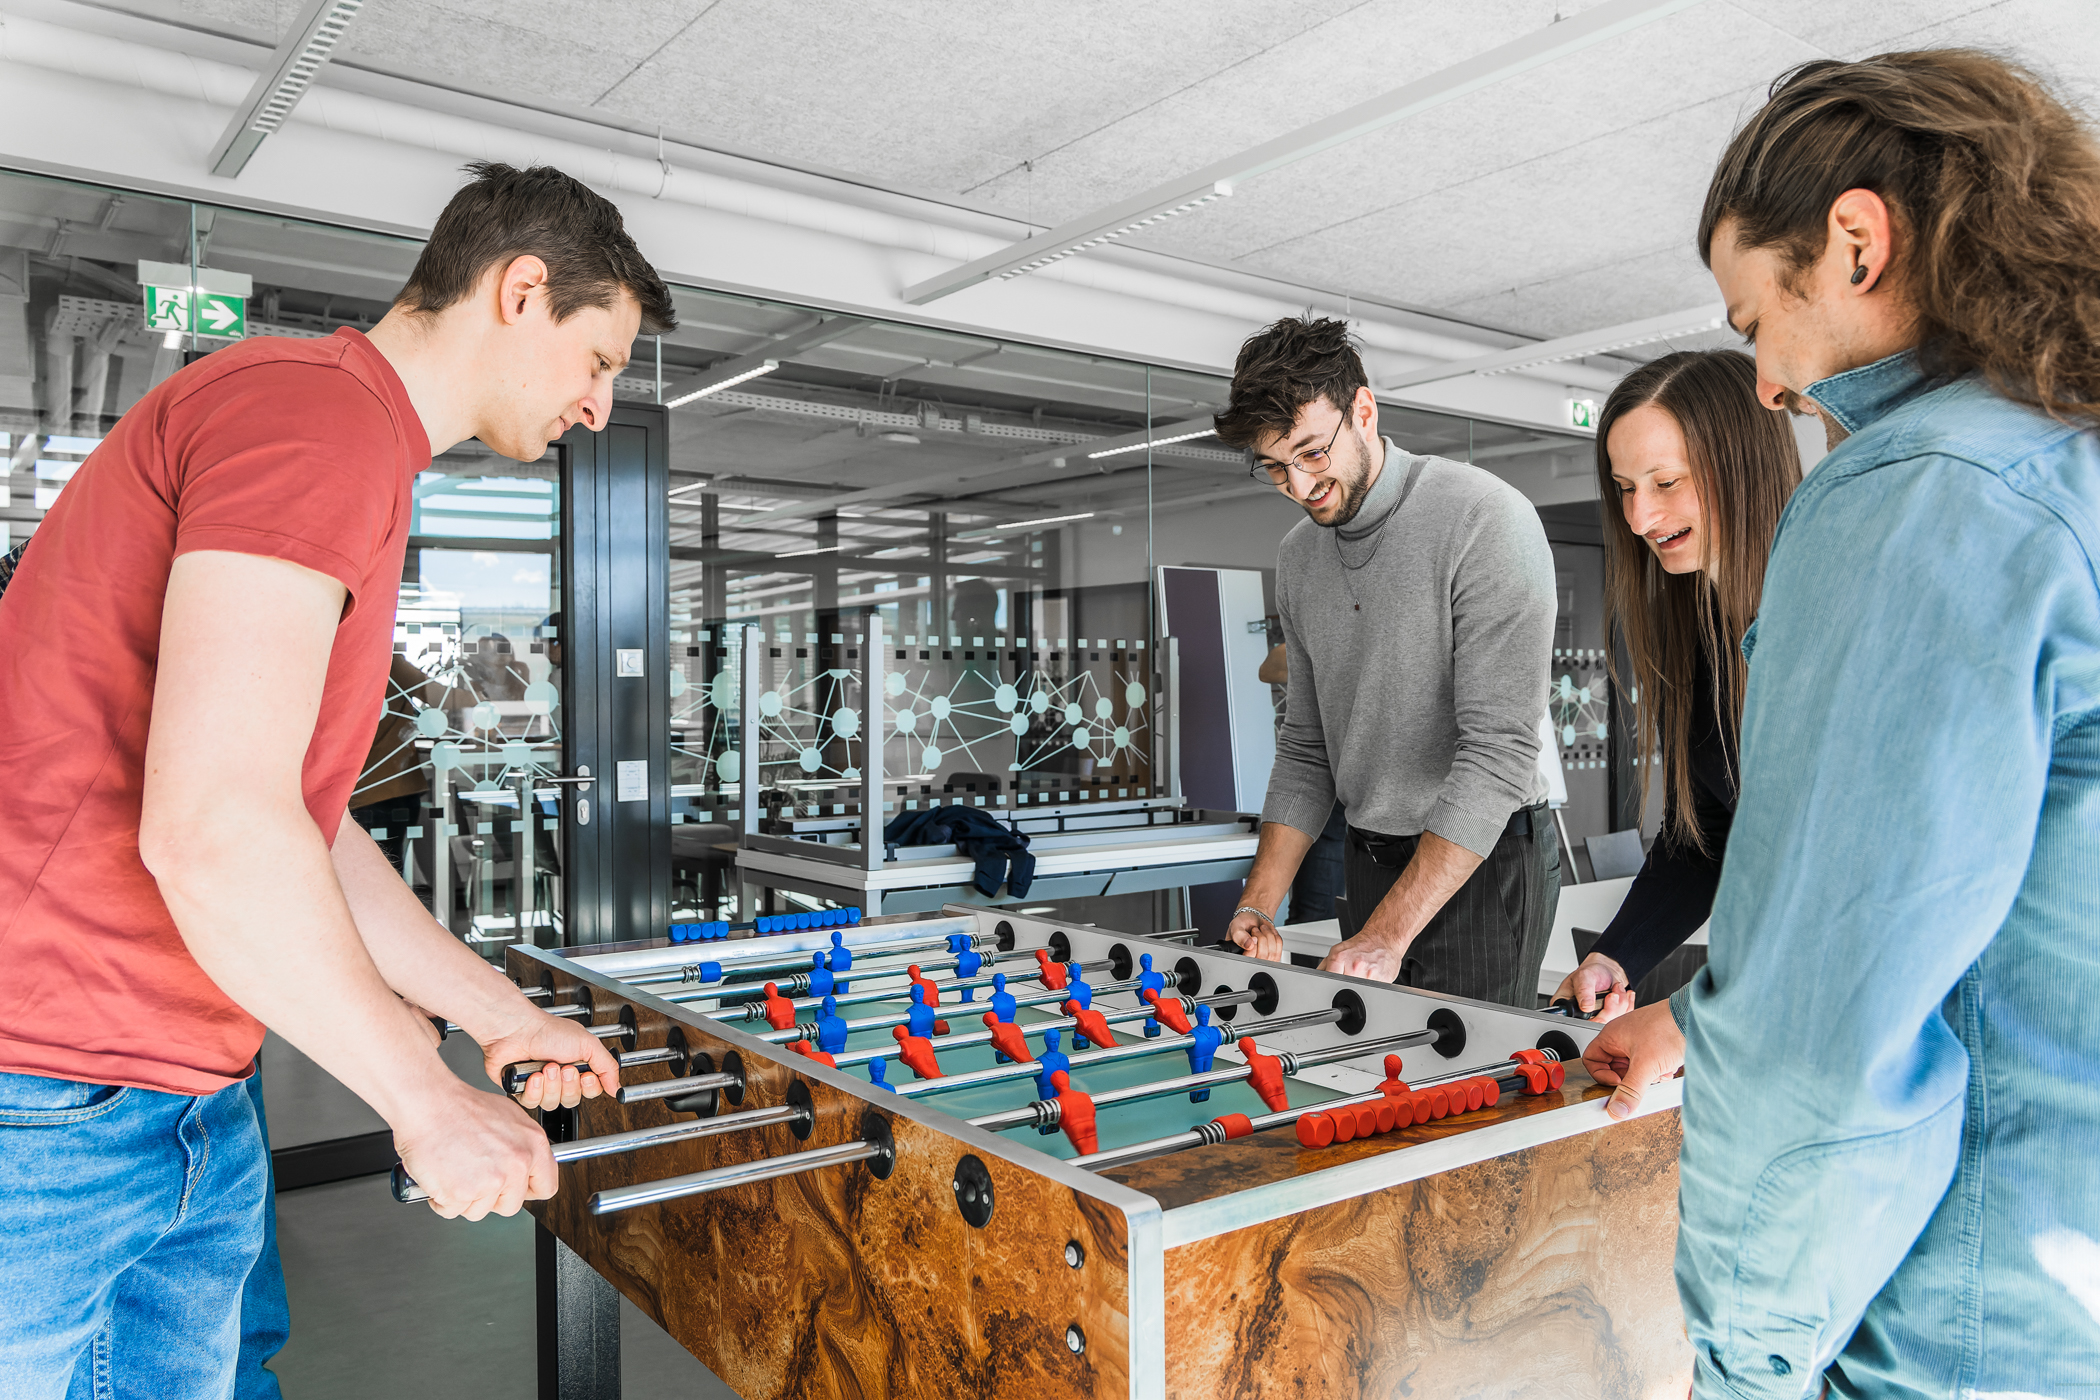 smaXtec employees playing table football during the break